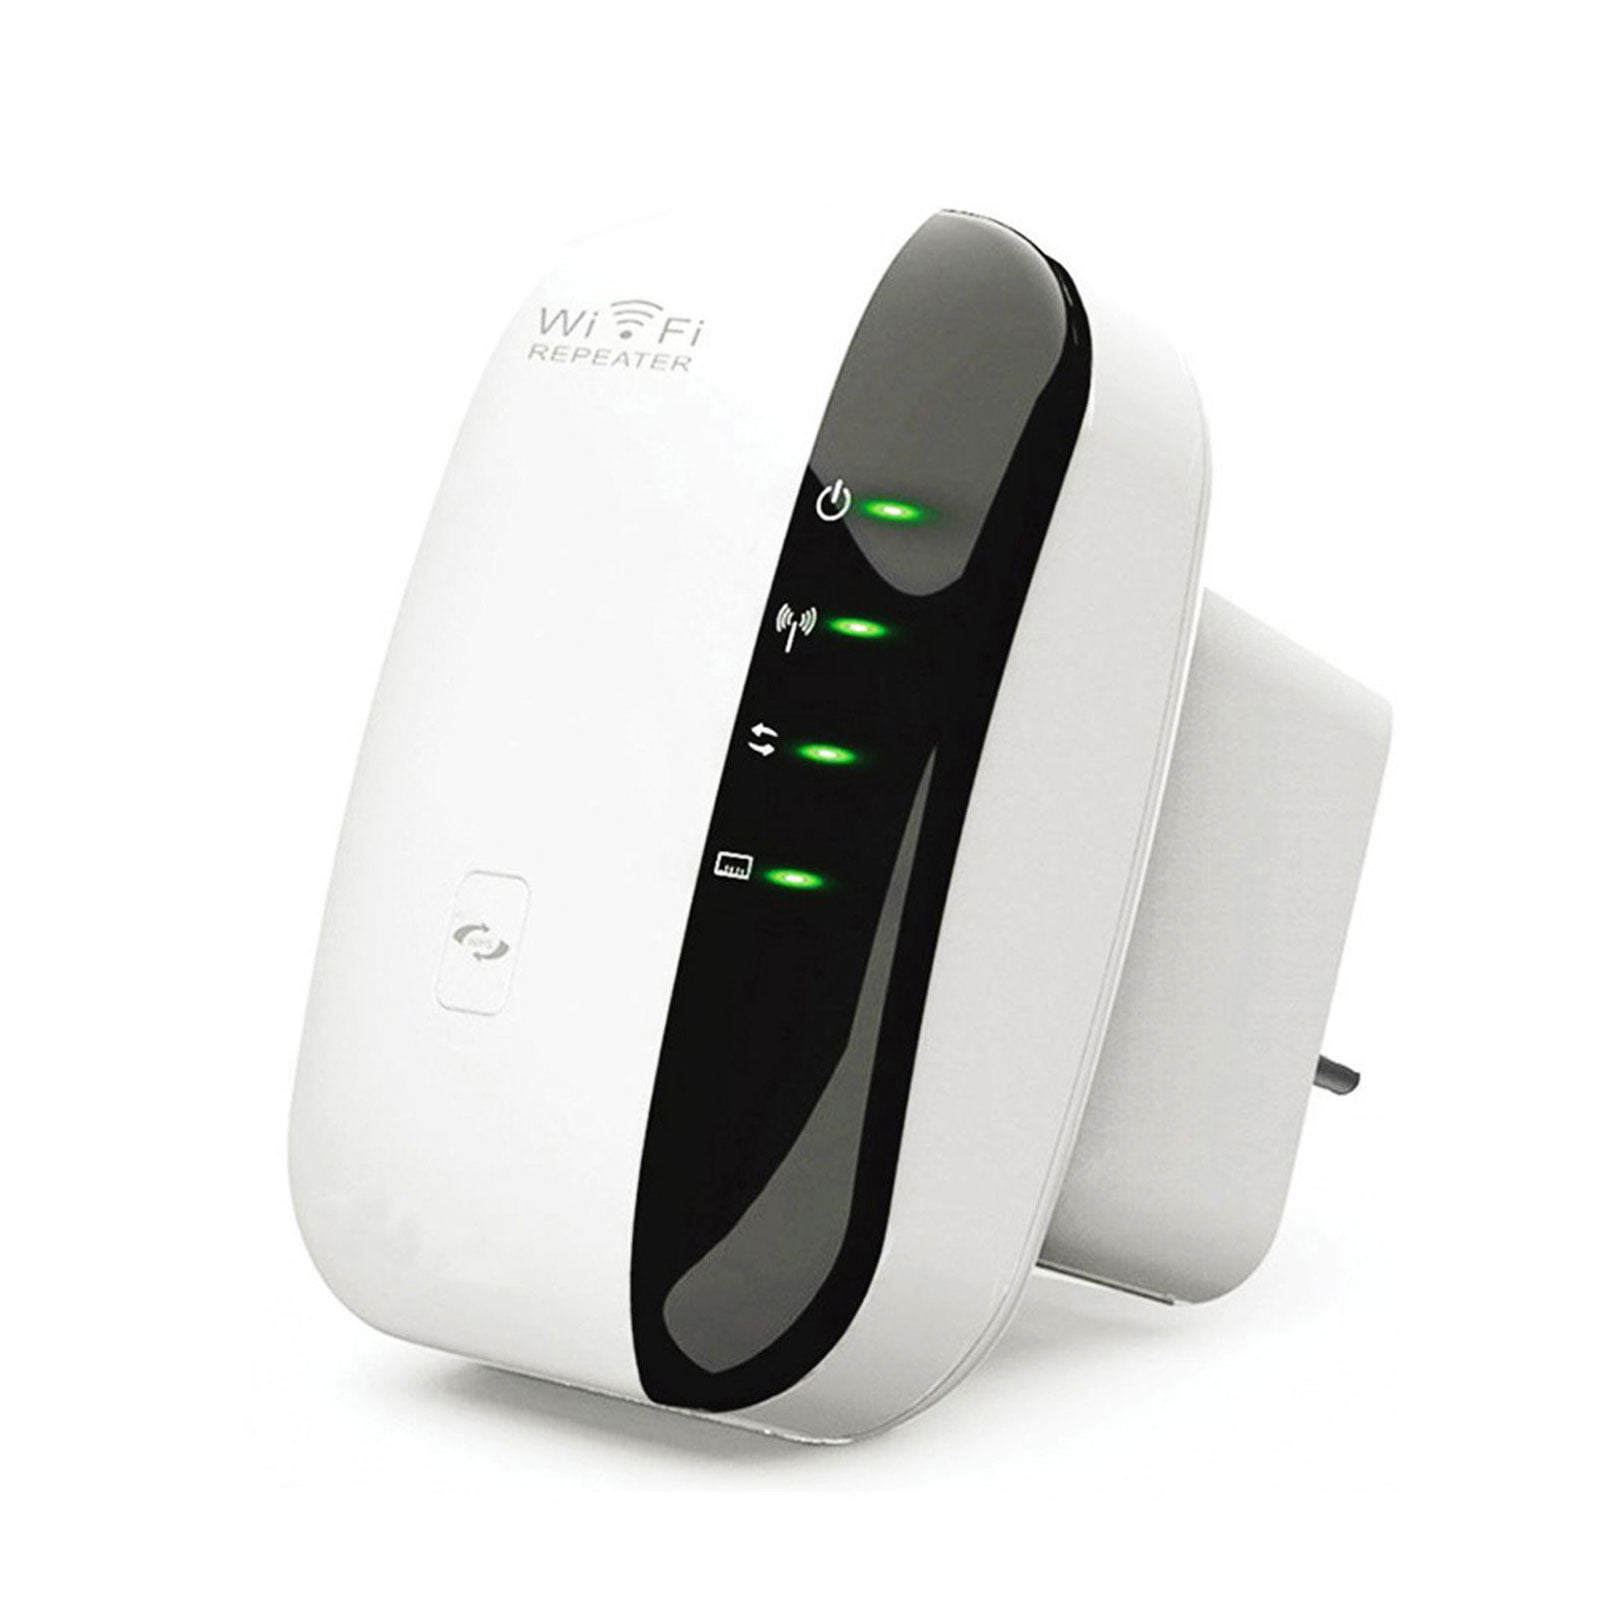 Wireless WiFi Repeater 300Mbps Signal Booster WiFi Range Extender Internet Router 